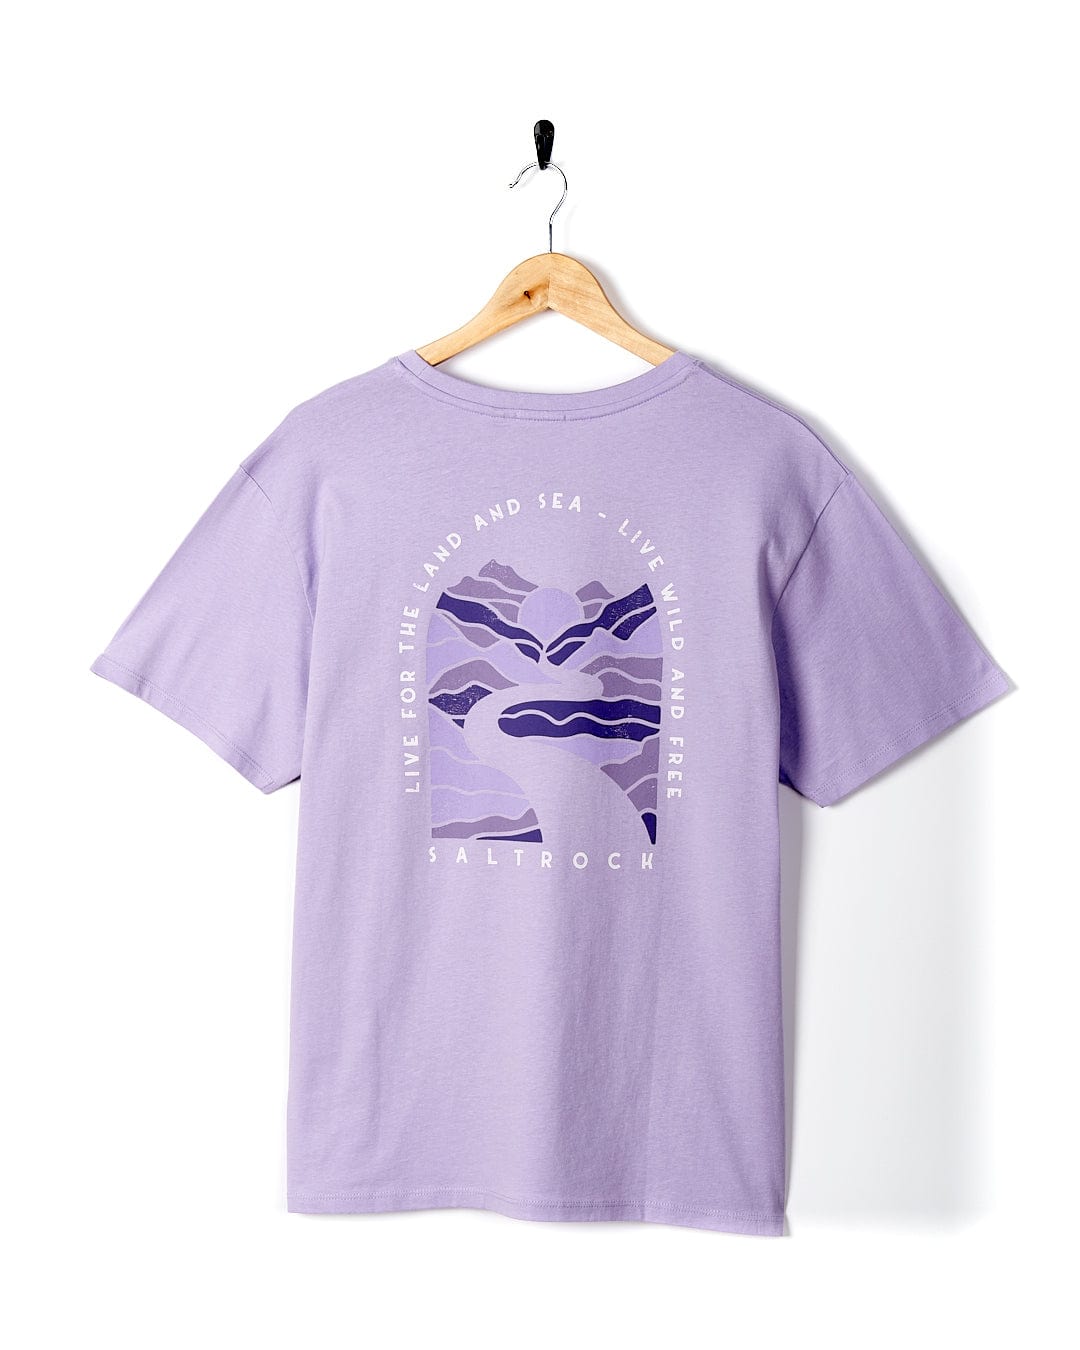 A Saltrock Live Wild - Womens Short Sleeve T-Shirt in Light Purple with an image of mountains on it.